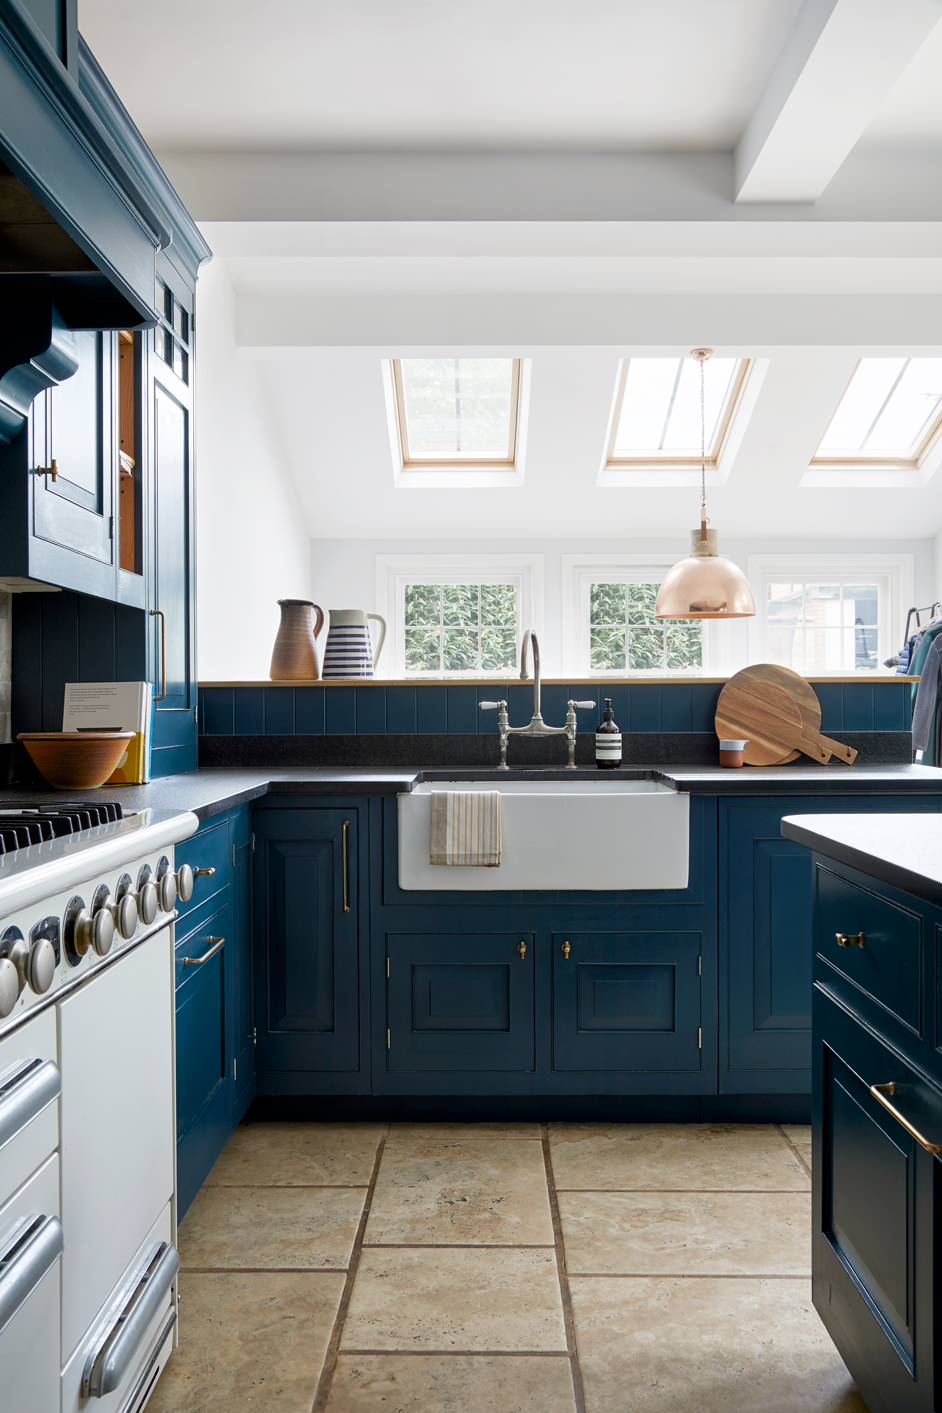 6 Hardware Styles to Pair With Deep-Blue Shaker Cabinets